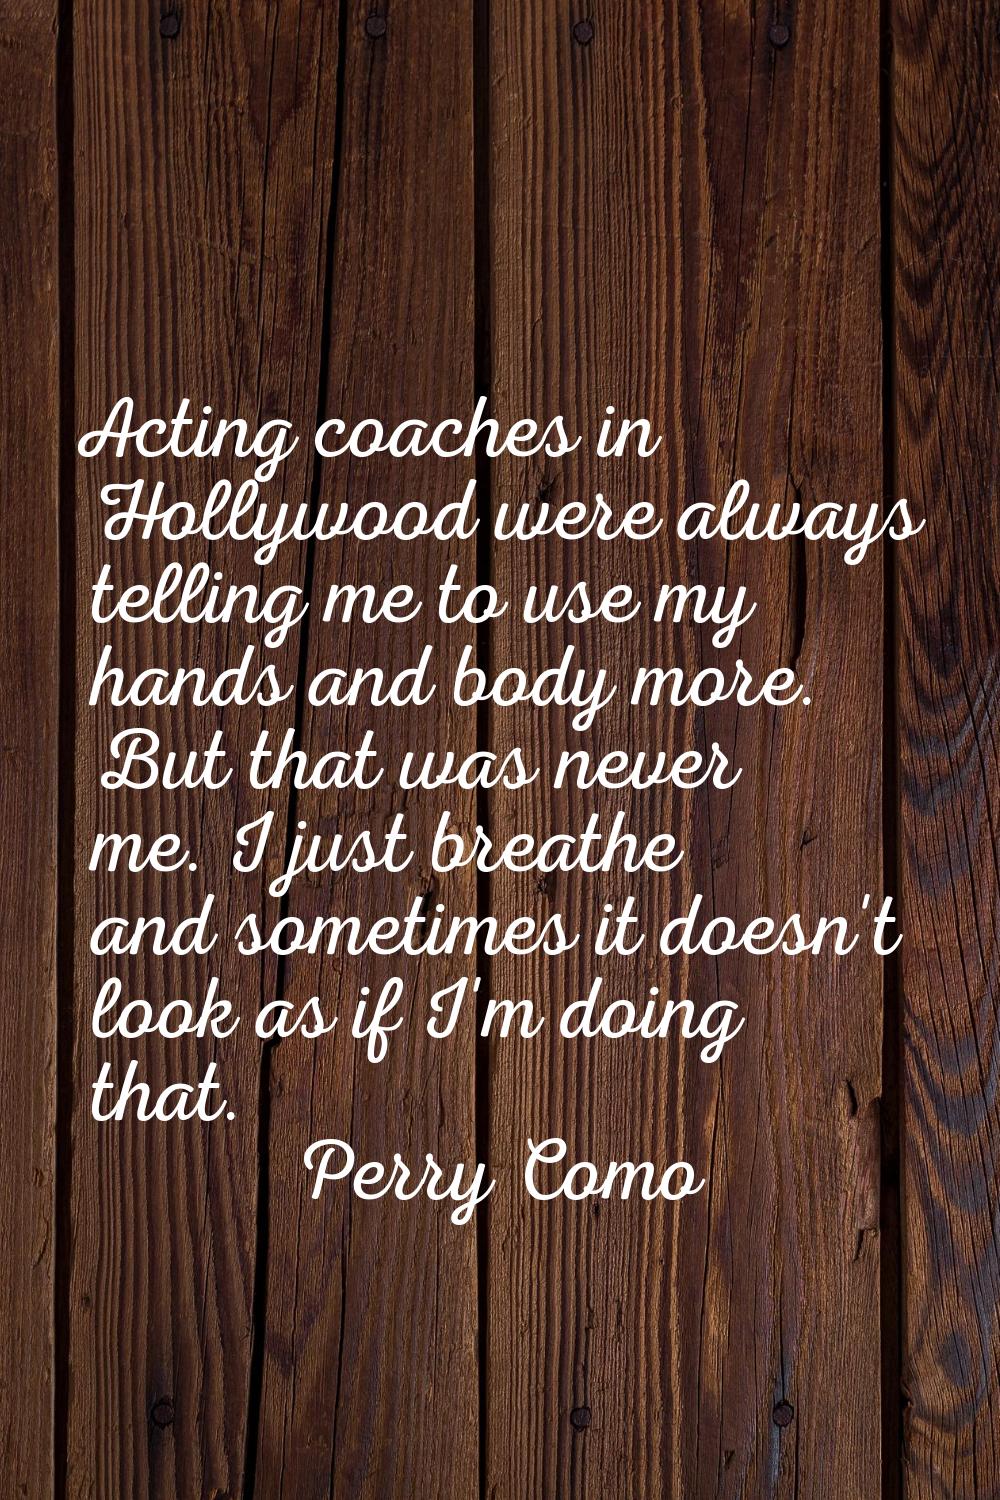 Acting coaches in Hollywood were always telling me to use my hands and body more. But that was neve